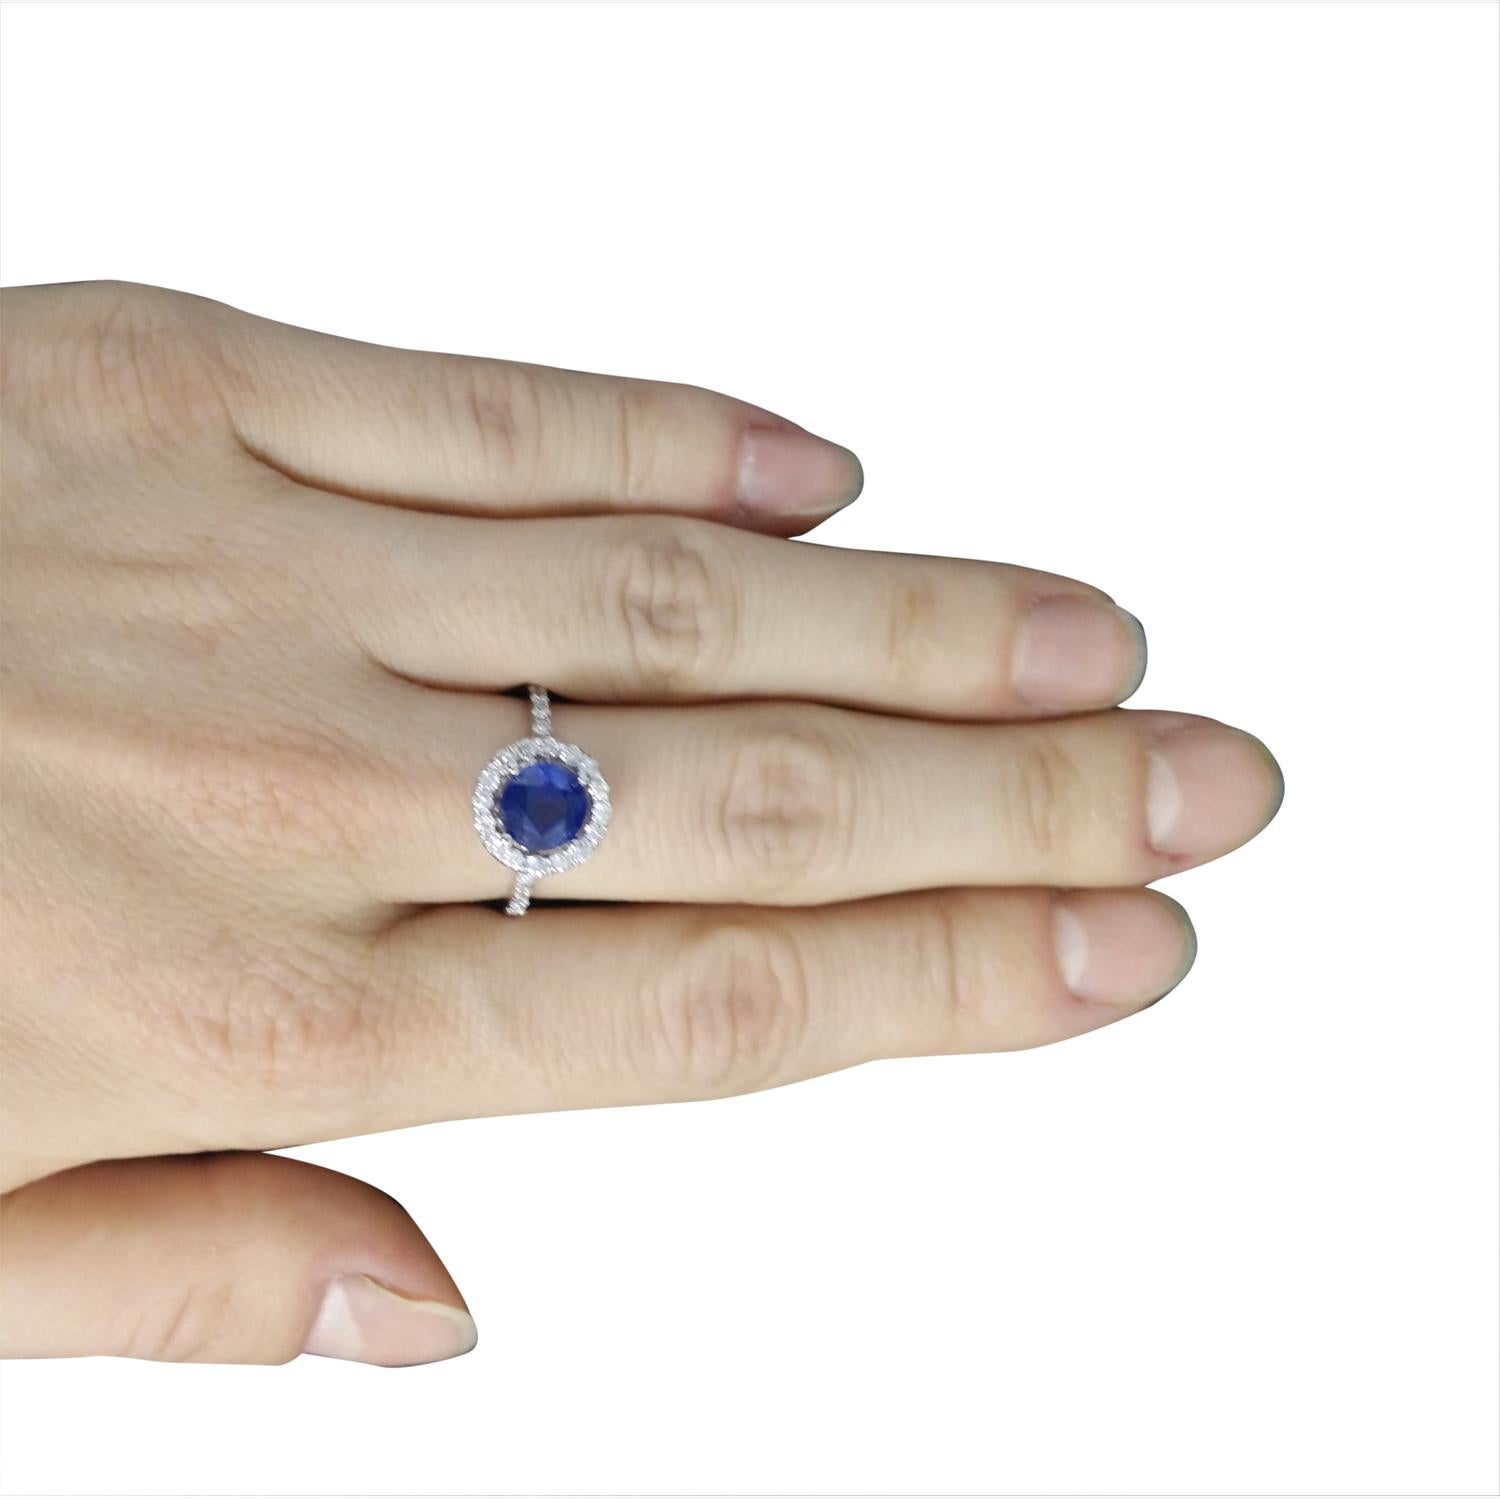 2.61 Carat Natural Sapphire 14 Karat Solid White Gold Diamond Ring
Stamped: 14K 
Ring Size: 7 
Total Ring Weight: 2.5 Grams 
Sapphire Weight: 2.01 Carat (7.00x7.00 Millimeter) 
Diamond Weight: 0.60 Carat (F-G Color, VS2-SI1 Clarity) 
Quantity: